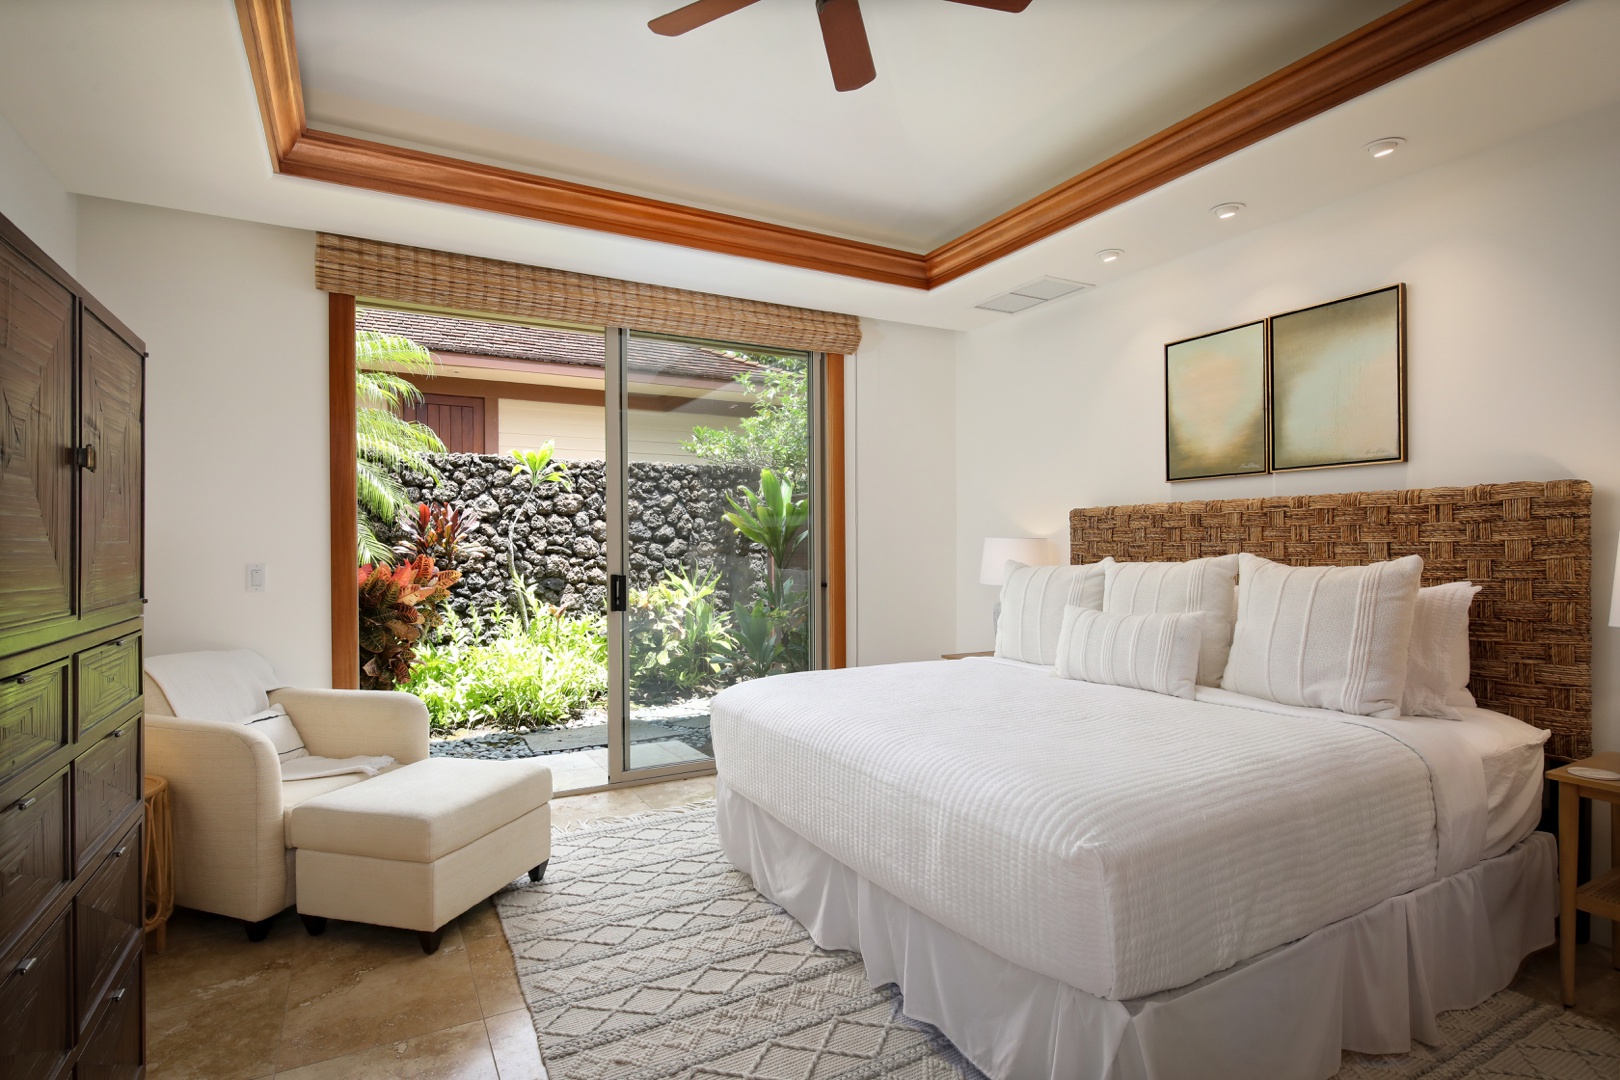 Kailua Kona Vacation Rentals, 4BD Pakui Street (147) Estate Home at Four Seasons Resort at Hualalai - Guest Suite #2 w/king bed, television, en suite bath and private entrance off the interior walkway.